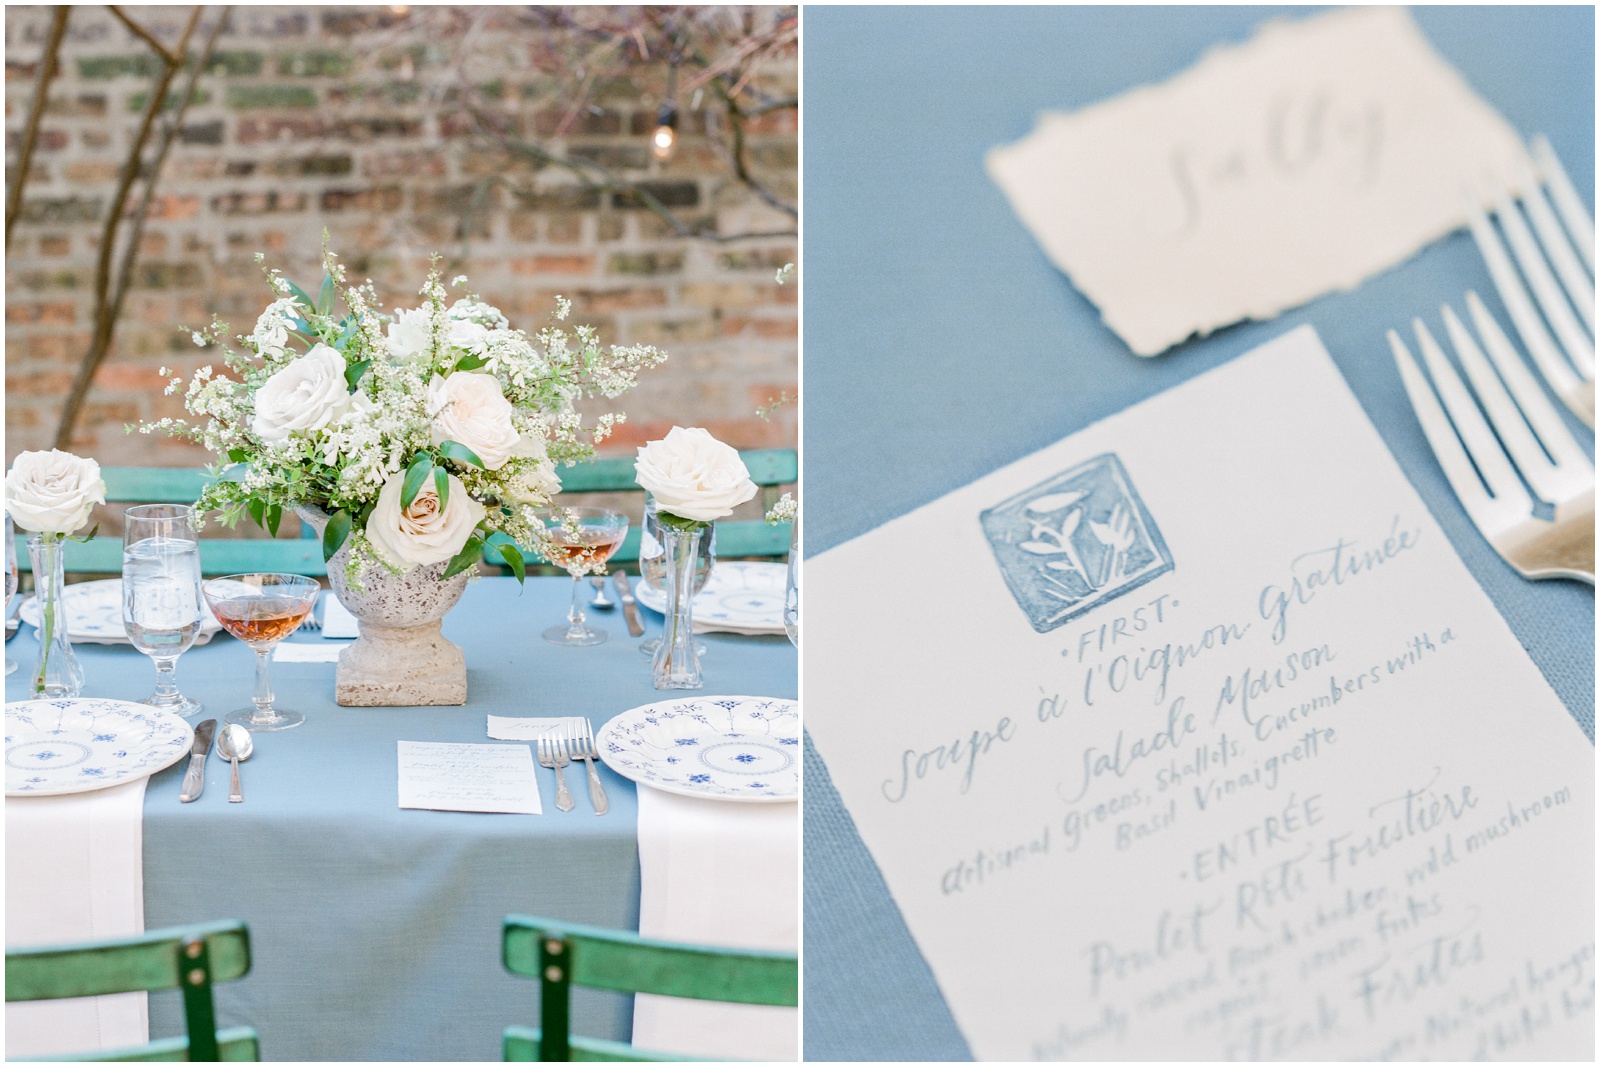 Simple French wedding table